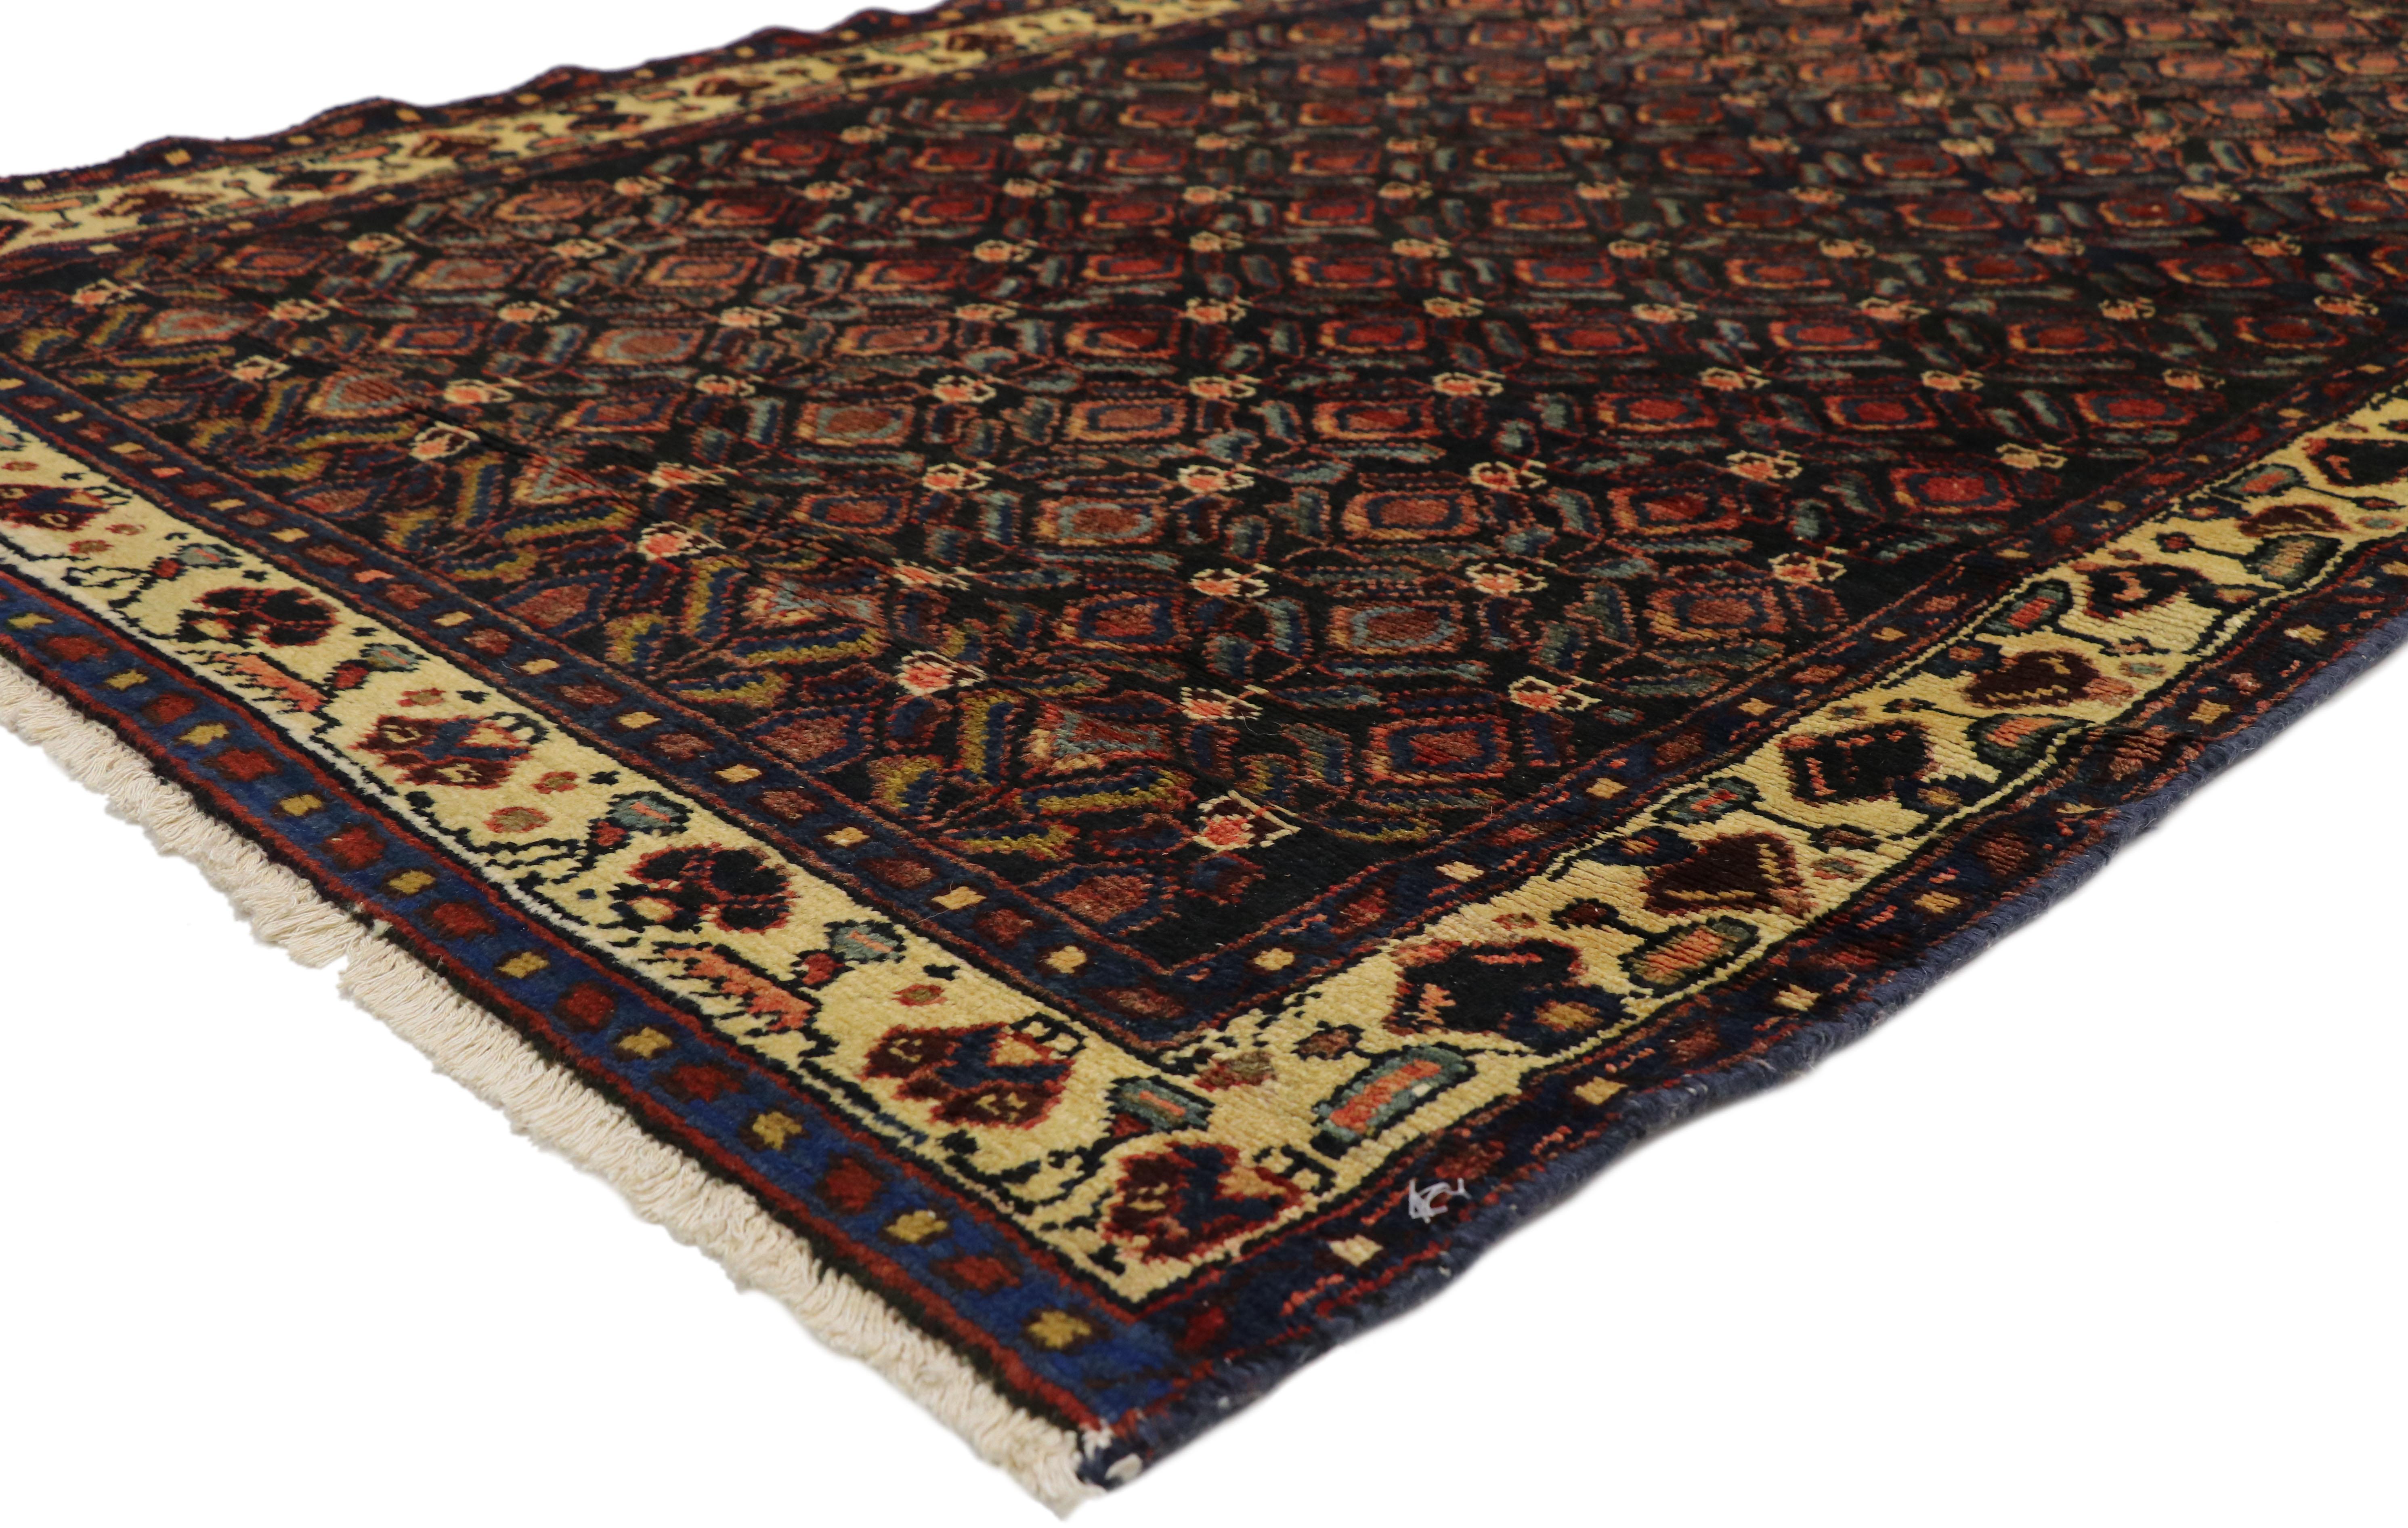 20th Century Antique Persian Malayer Runner with Aesthetic Movement and Craftsman Style